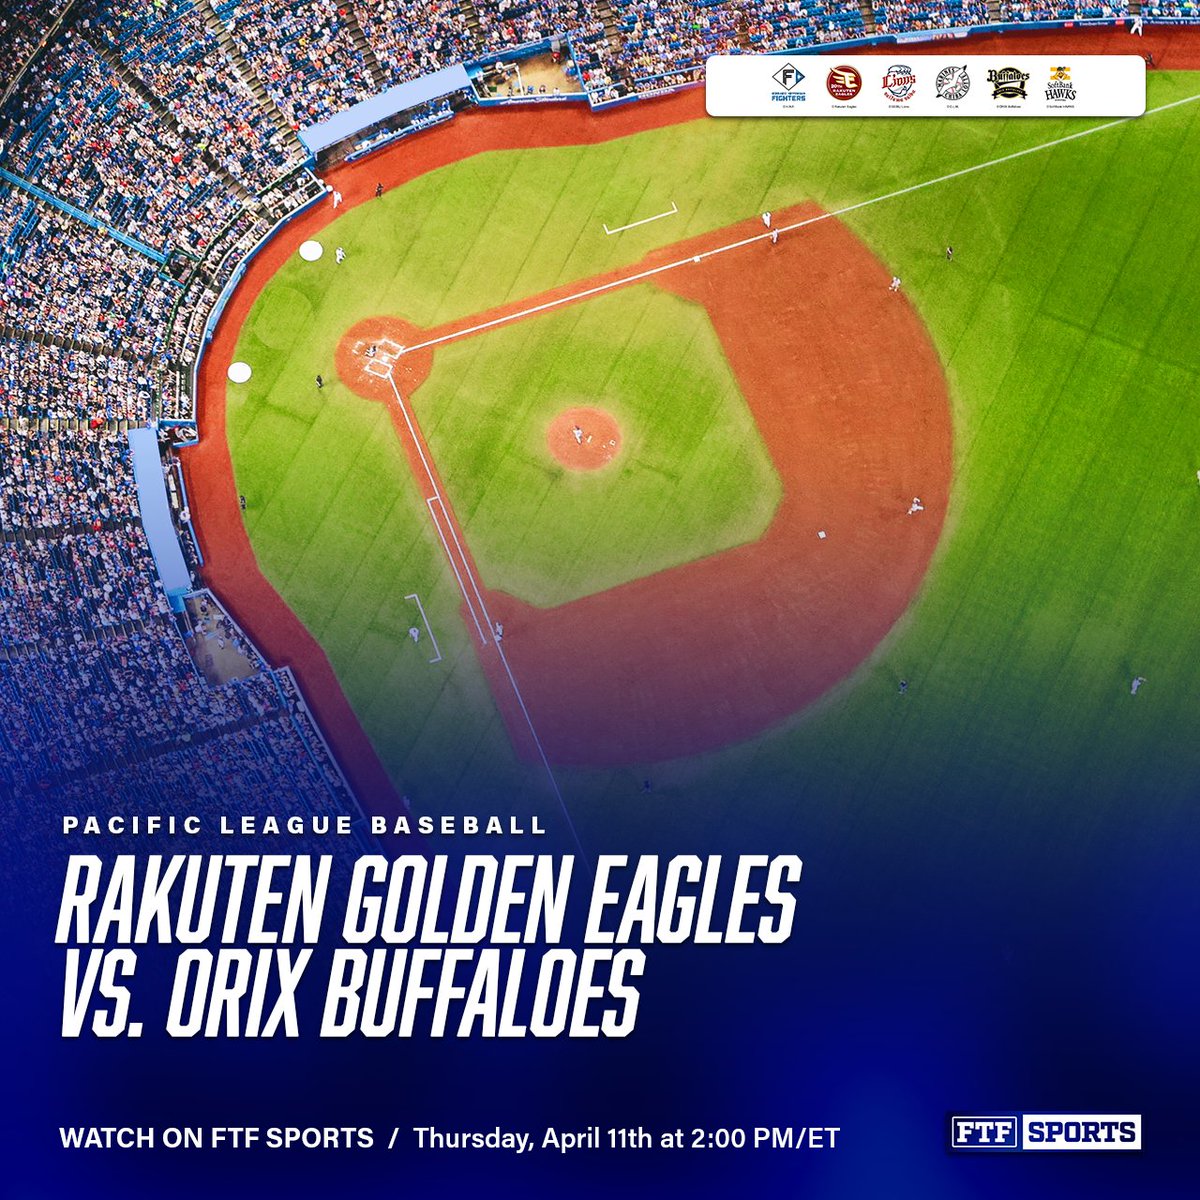 TODAY at 2:00PM/ET on FTF Sports PACIFIC LEAGUE BASEBALL Rakuten Golden Eagles vs. Orix Buffaloes WATCH HERE ➡️ bit.ly/DingoTV_FTFSpo… 📺 @WatchDingoTV Watch FTF Sports on your preferred devices including iOS, Android, Web, and leading Connected TV applications.